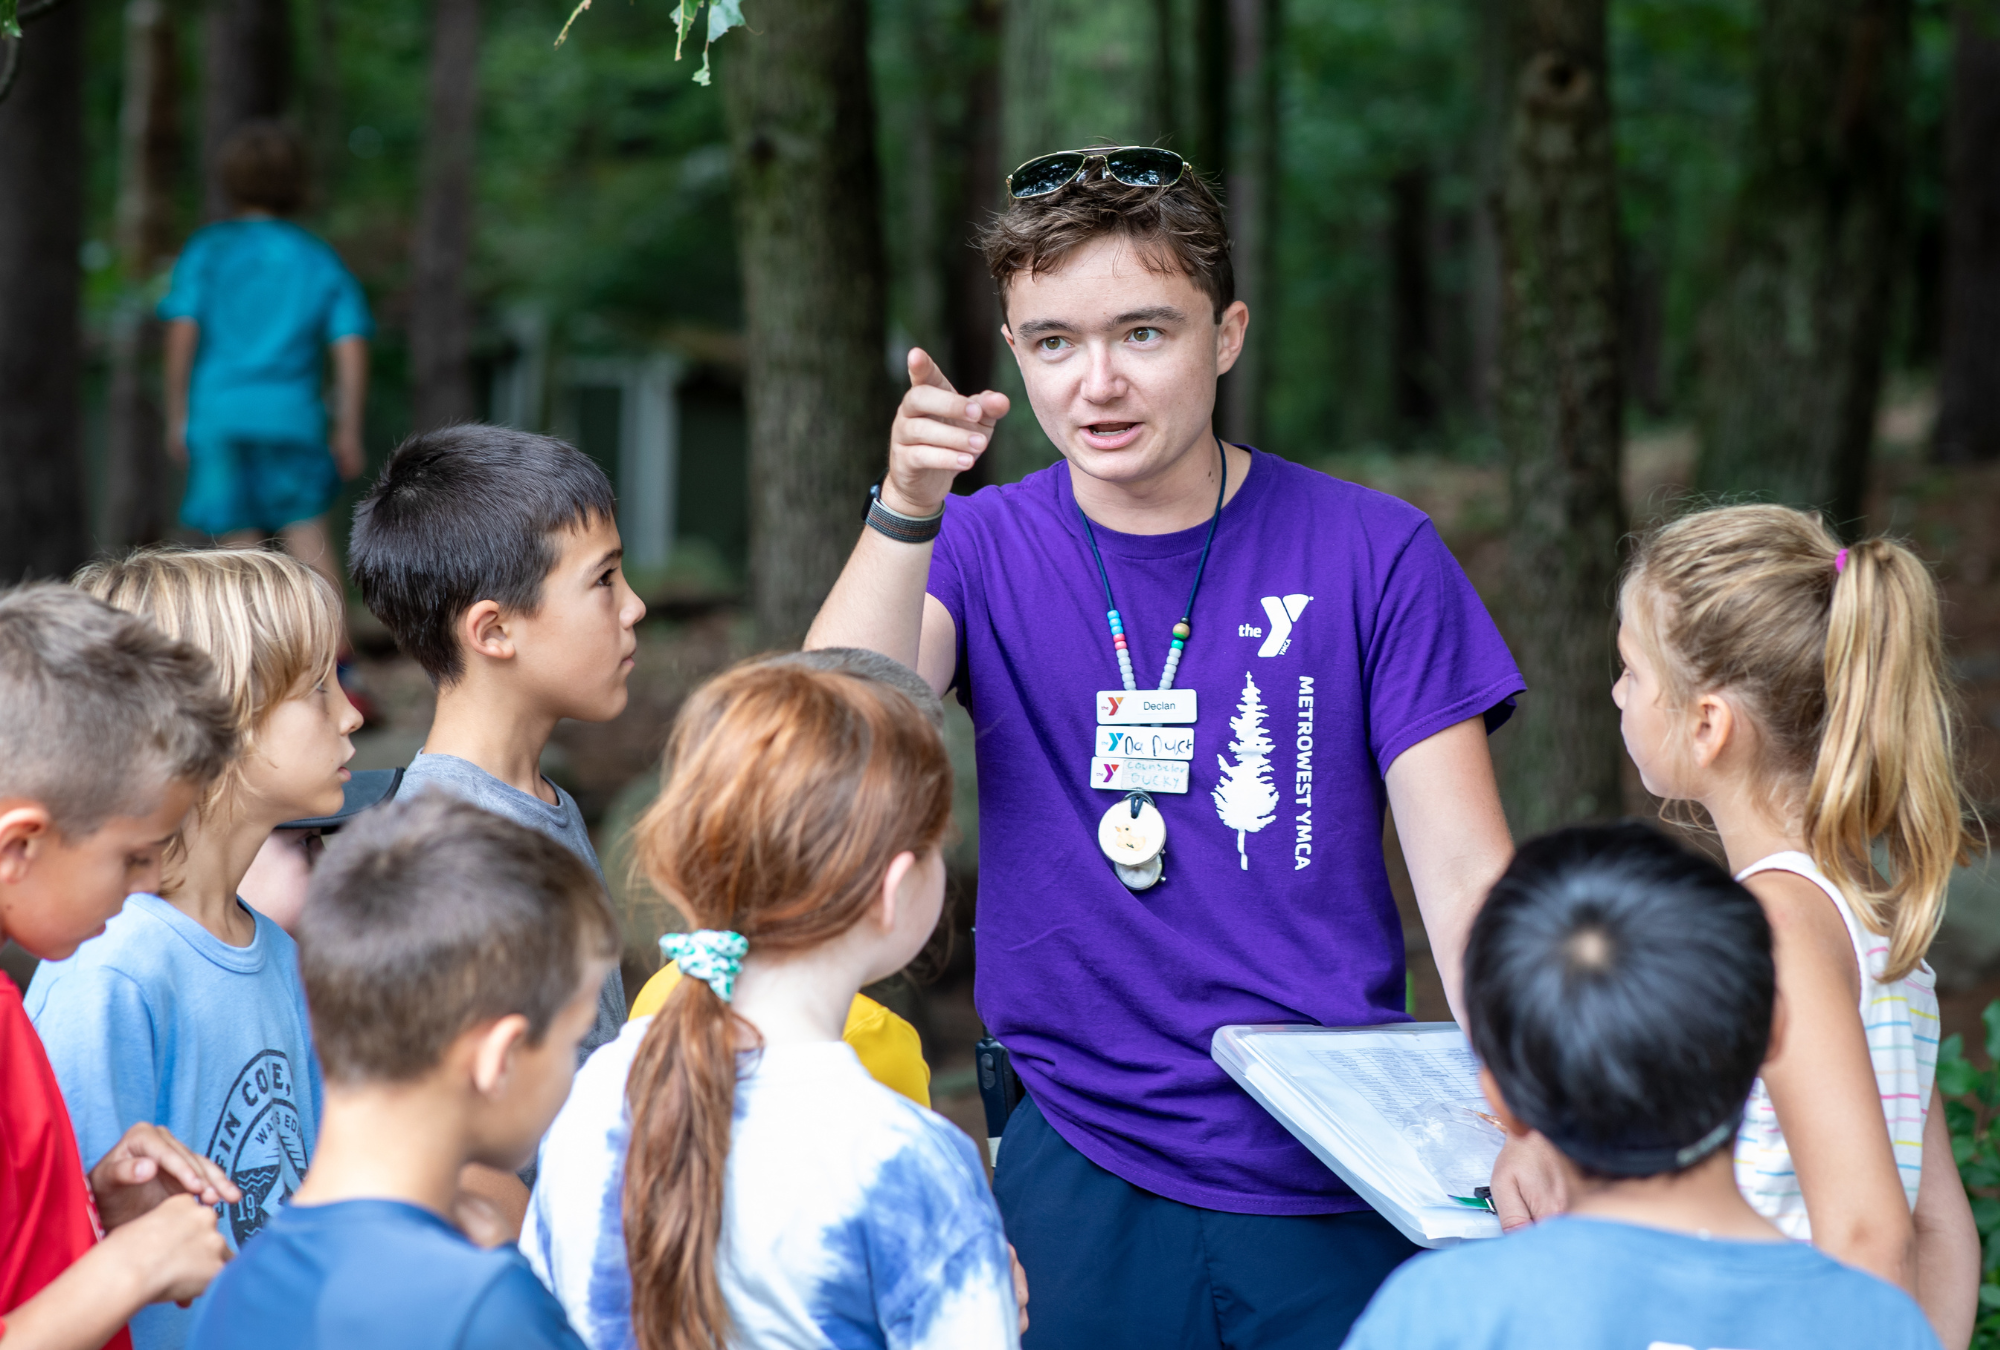 Counselor leads the middler campers through a nature walk